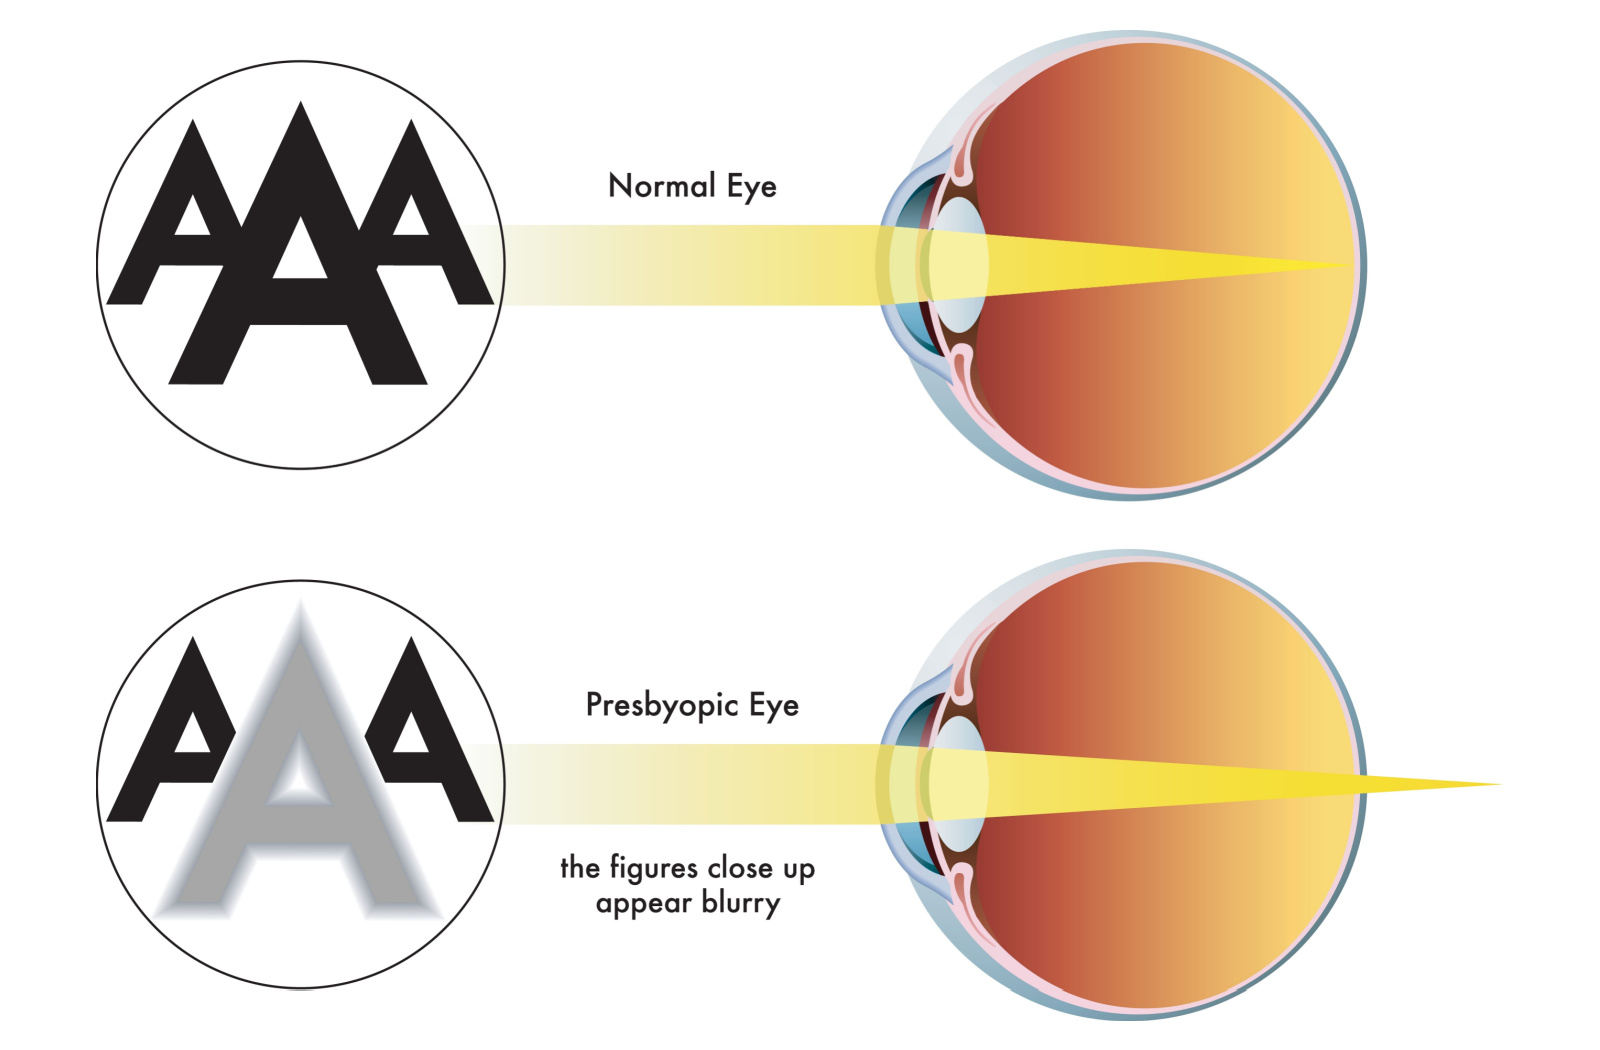 Drawing showing the difference between regular eye and presbyopic eye.